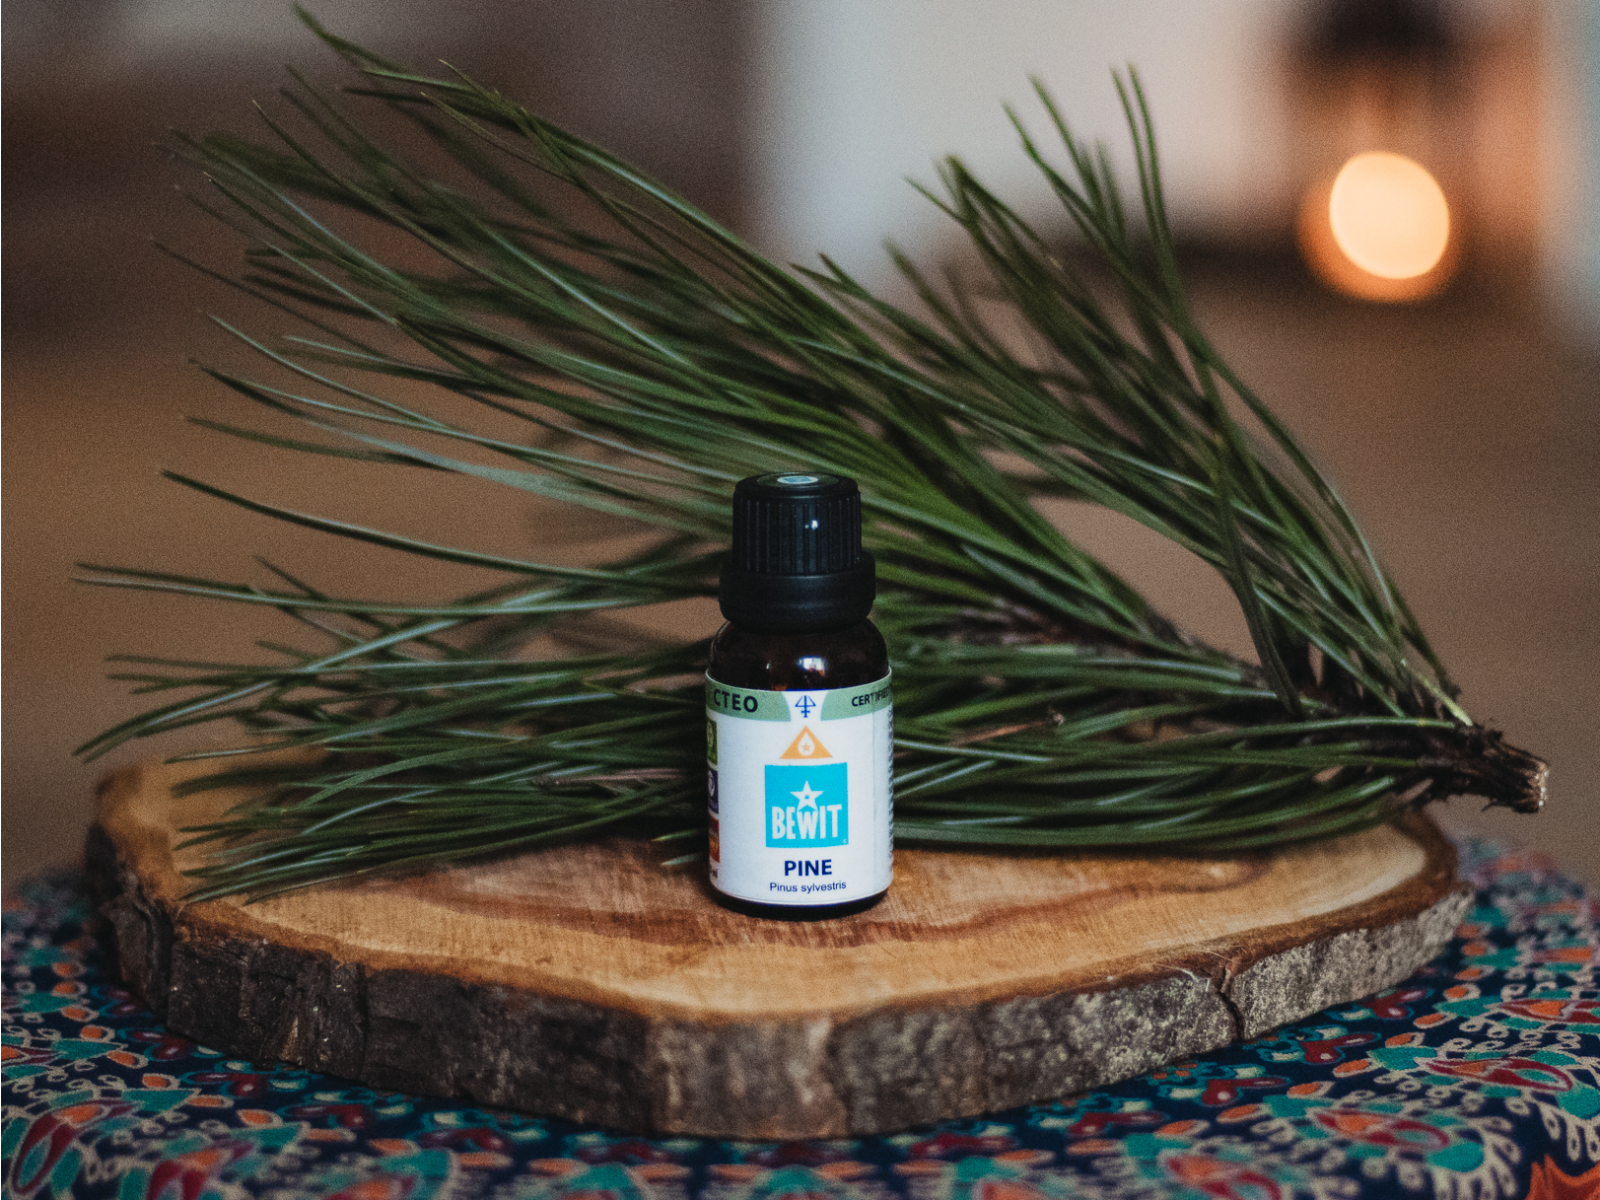 BEWIT Pine - This is a 100% pure essential oil - 8